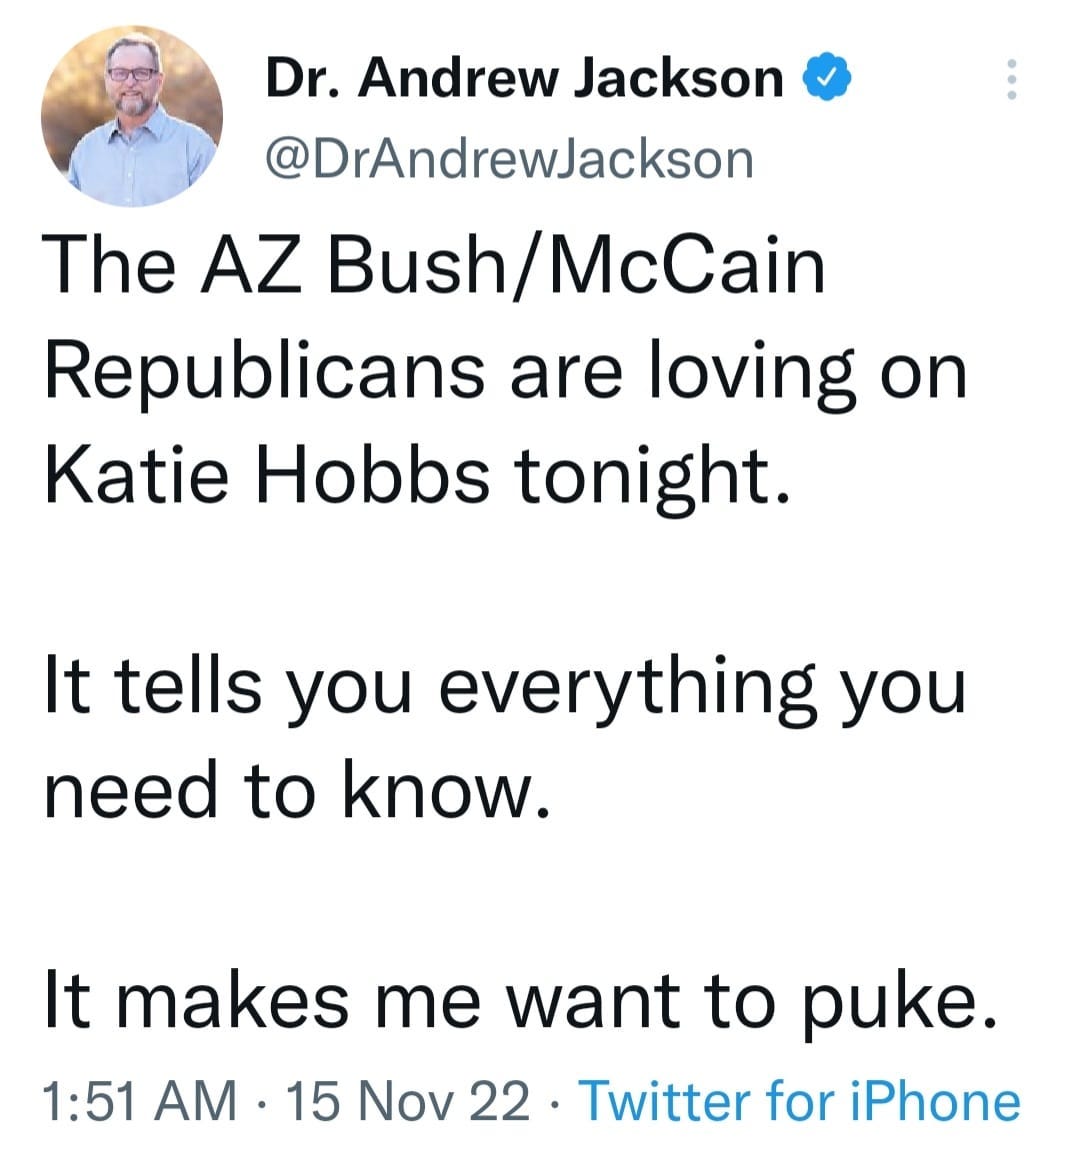 May be a Twitter screenshot of 1 person and text that says 'Dr. Andrew Jackson @DrAndrewJackson The AZ Bush/ McCain Republicans are loving on Katie Hobbs tonight. It tells you everything you need to know. It makes me want to puke. 1:51 AM 15 Nov 22 Twitter for iPhone'